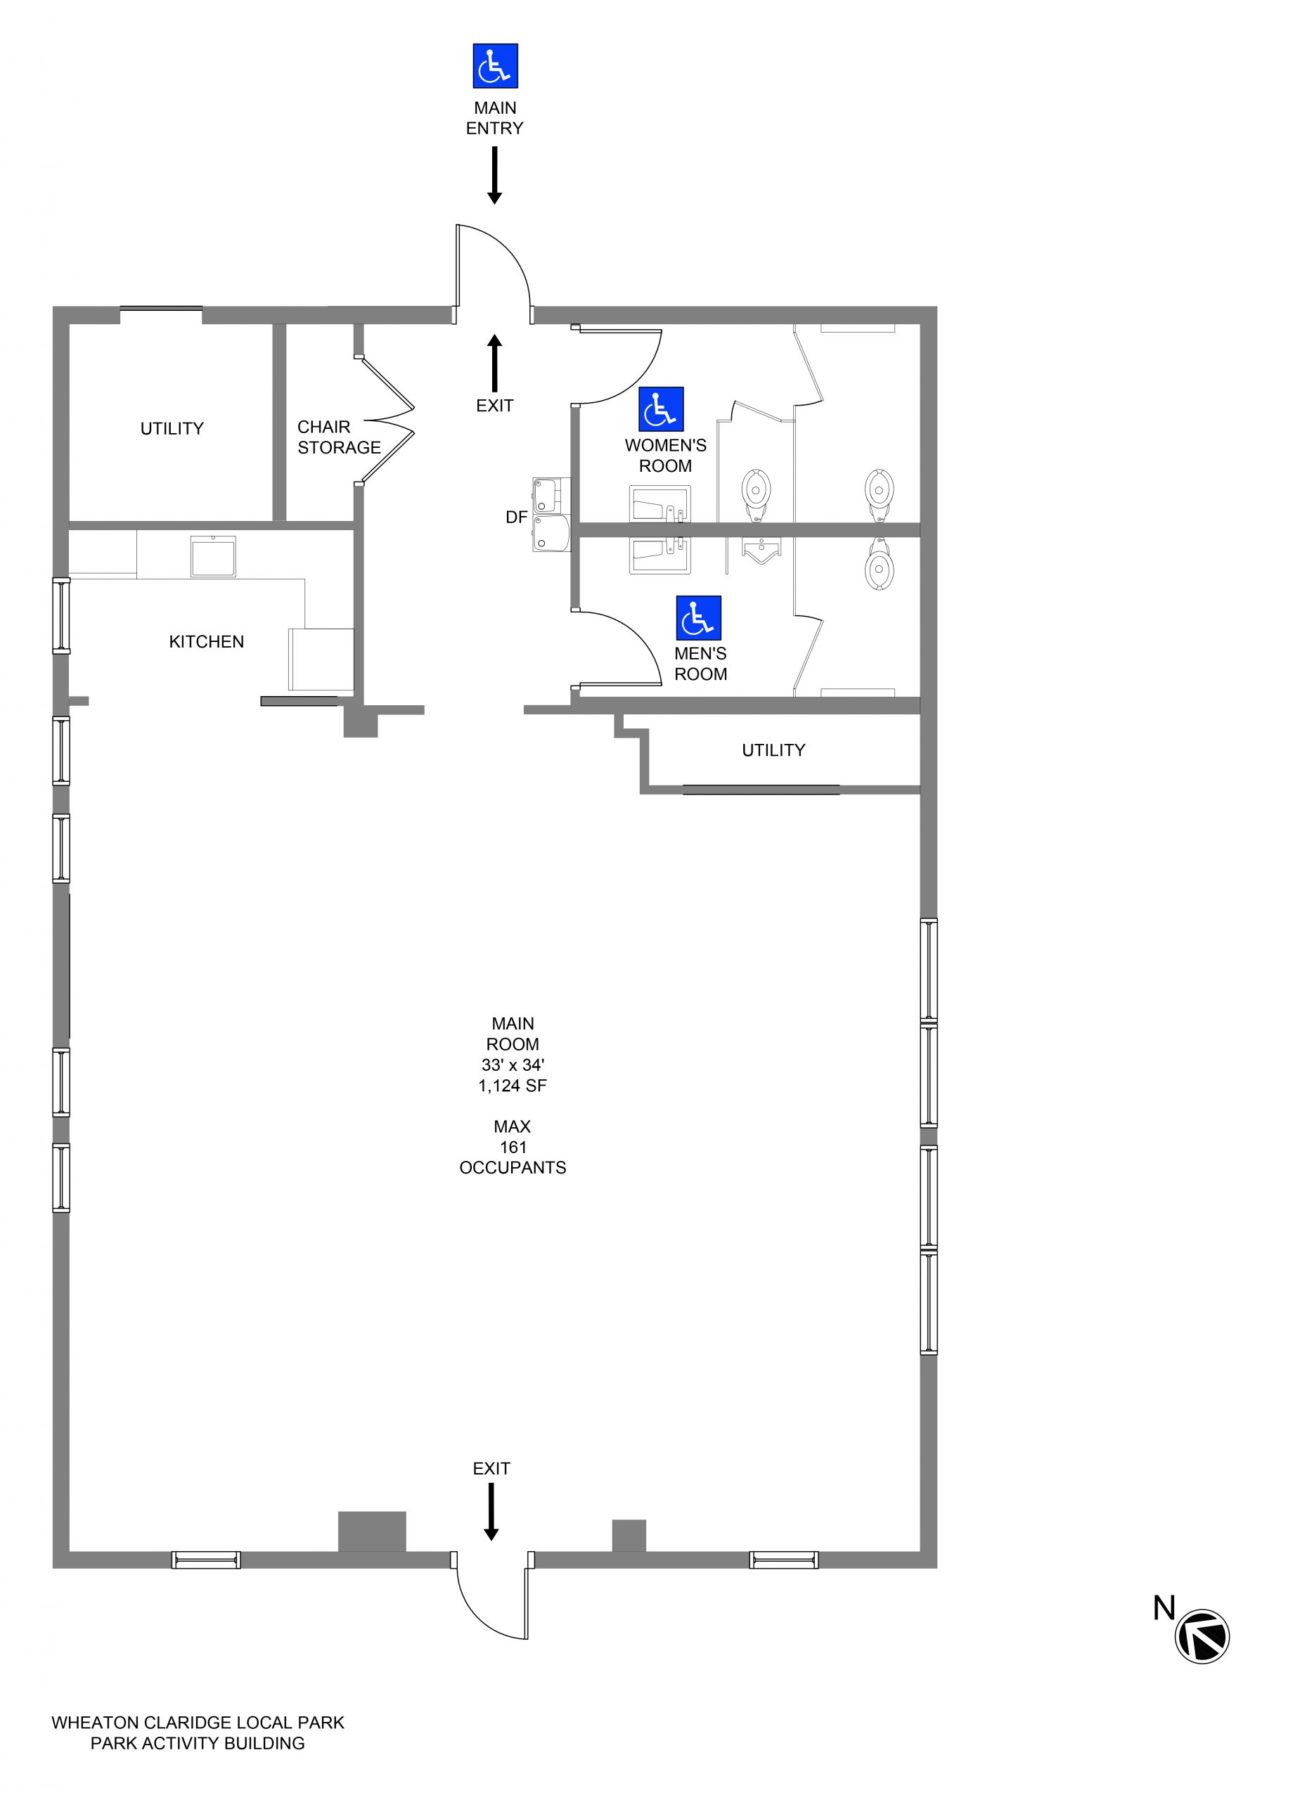 Line Drawing of the floorplan for the public activity building facility